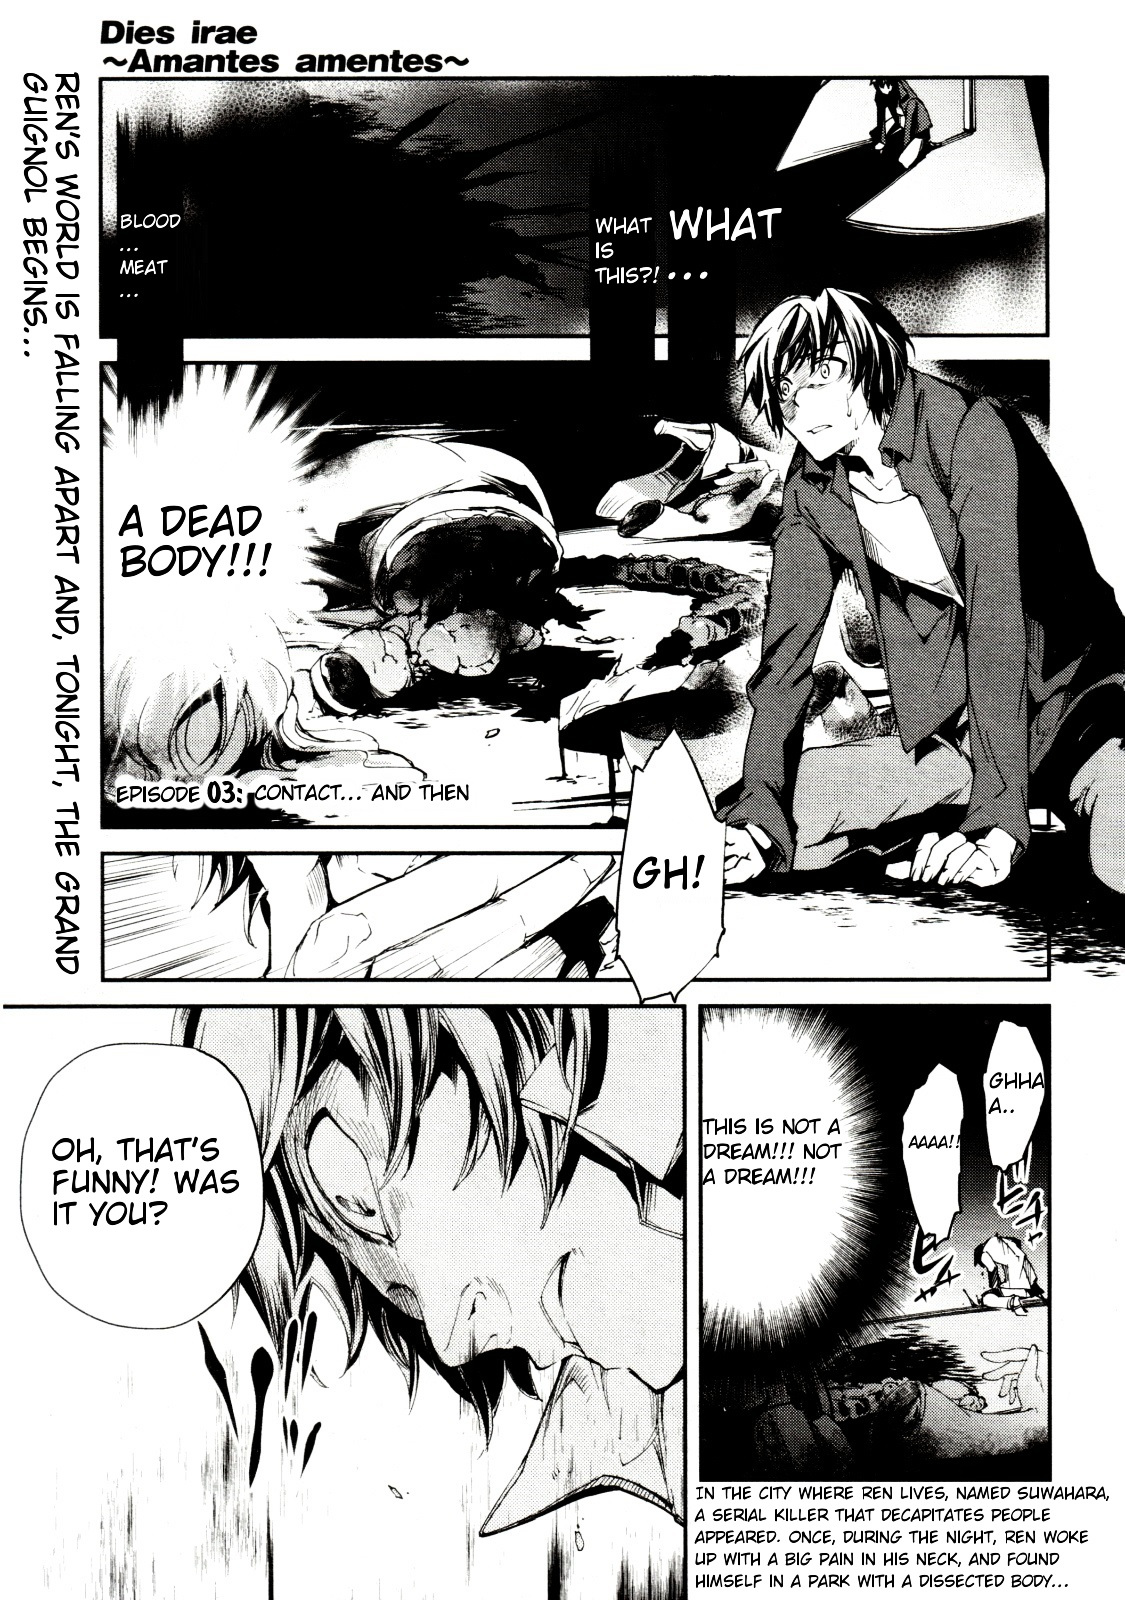 Dies Irae - Amantes Amentes Chapter 3 #1